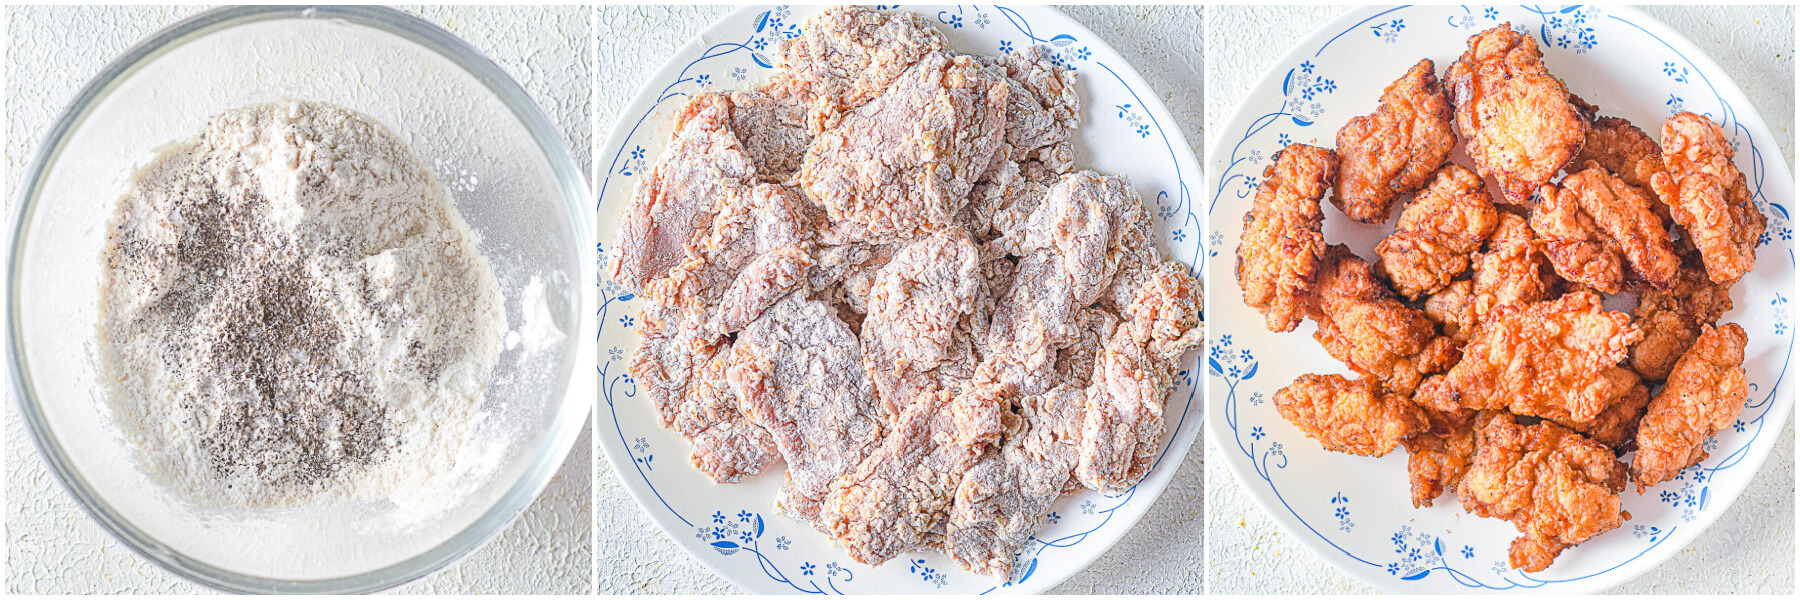 Process images showing how to dredge marinated chicken in mochiko flour.